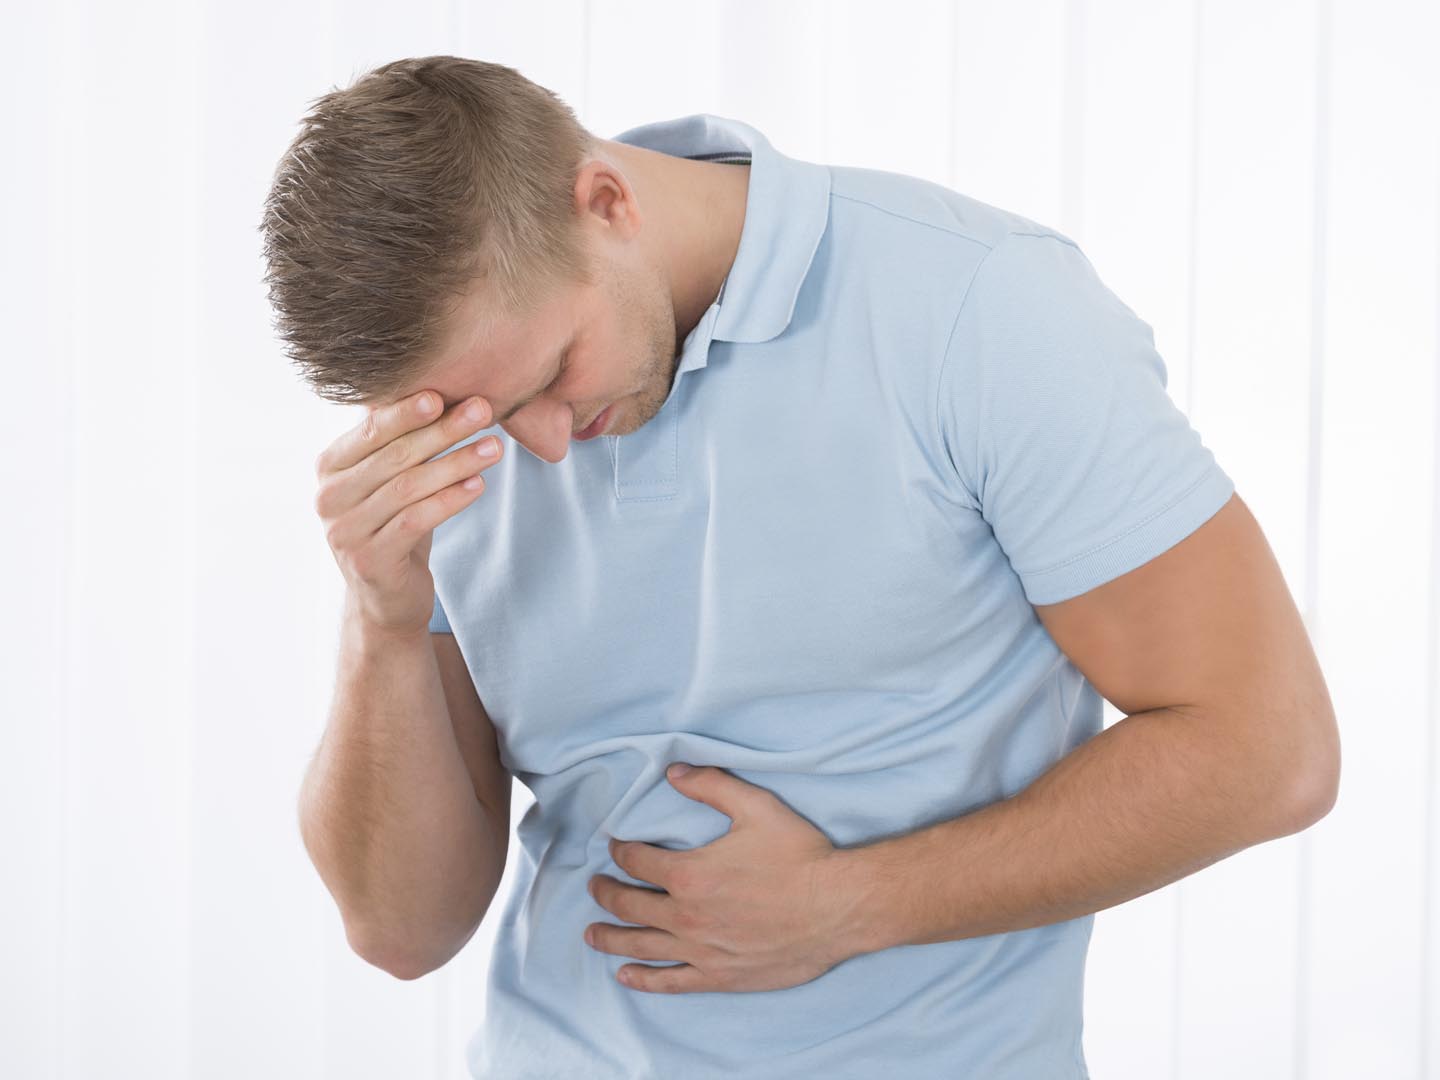 Does adjusting your diet cure peptic ulcer disease?